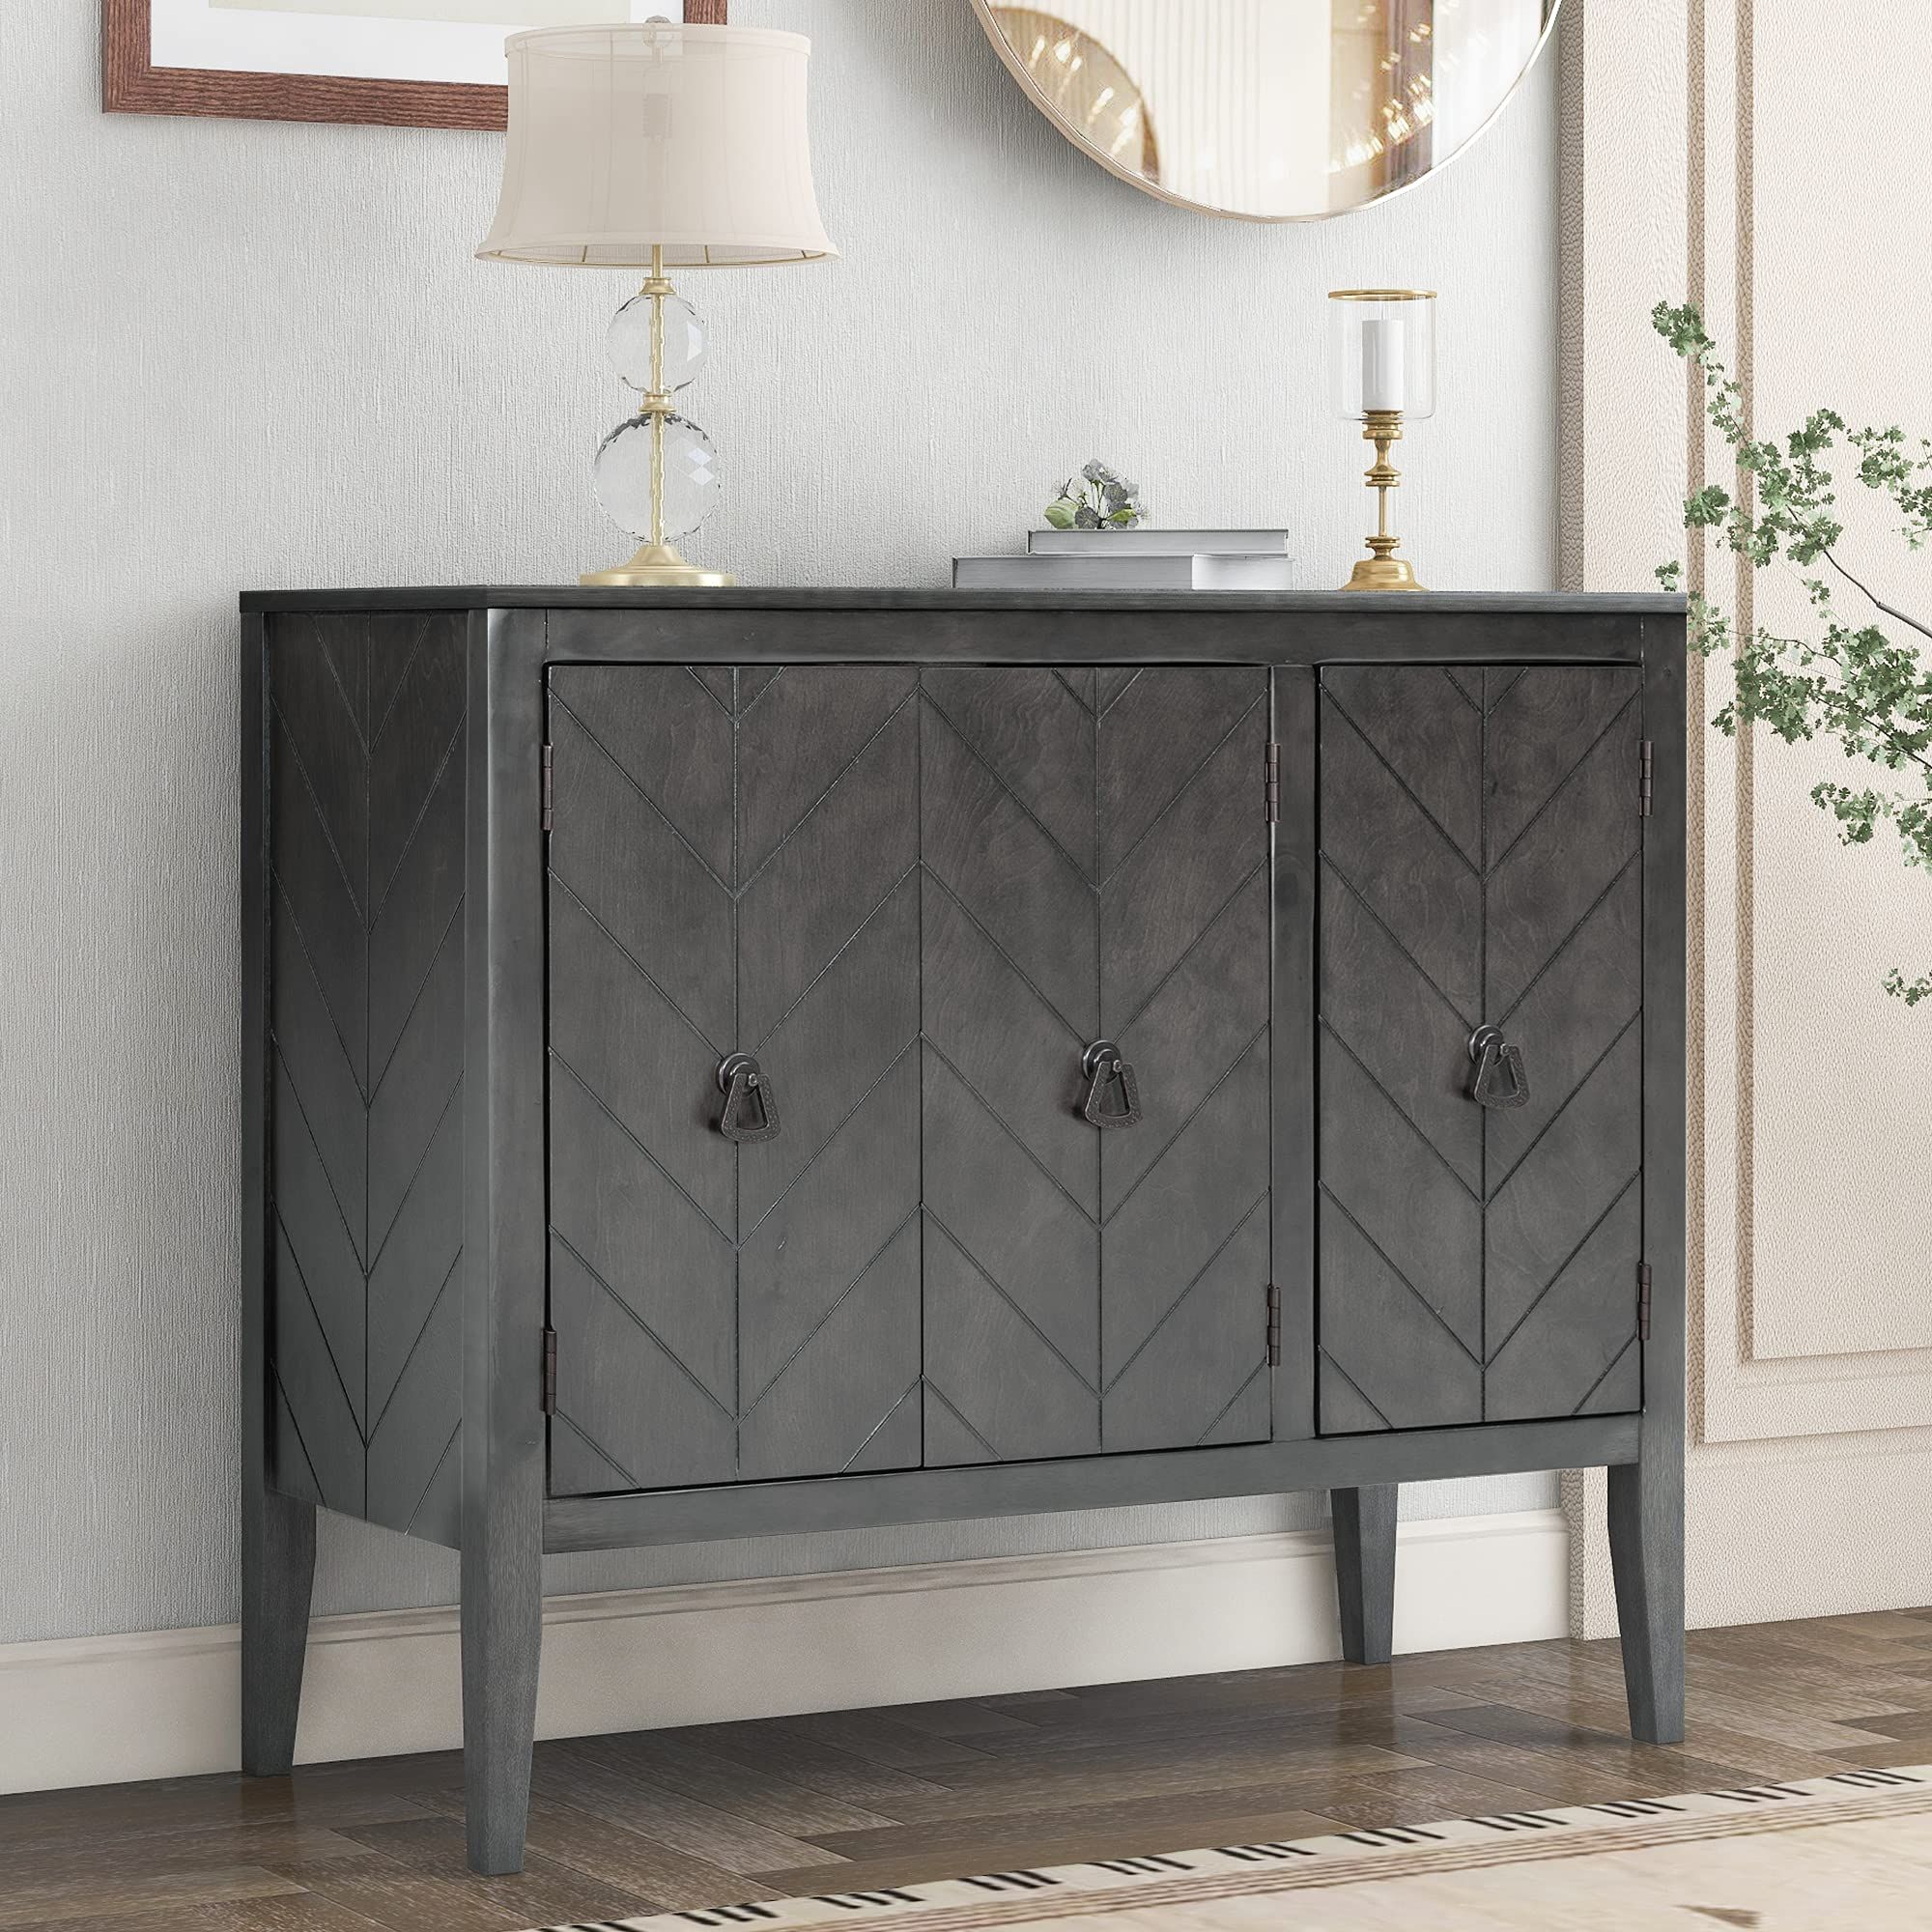 Antique Storage Sideboards With Doors With Famous Amazon: Knocbel Antique Storage Cabinet With Doors And Adjustable  Shelf, Solid Wood Buffet Sideboard Entry Console Table For Living Room  Dining Room Kitchen, 37"lx15.7"wx (View 6 of 10)